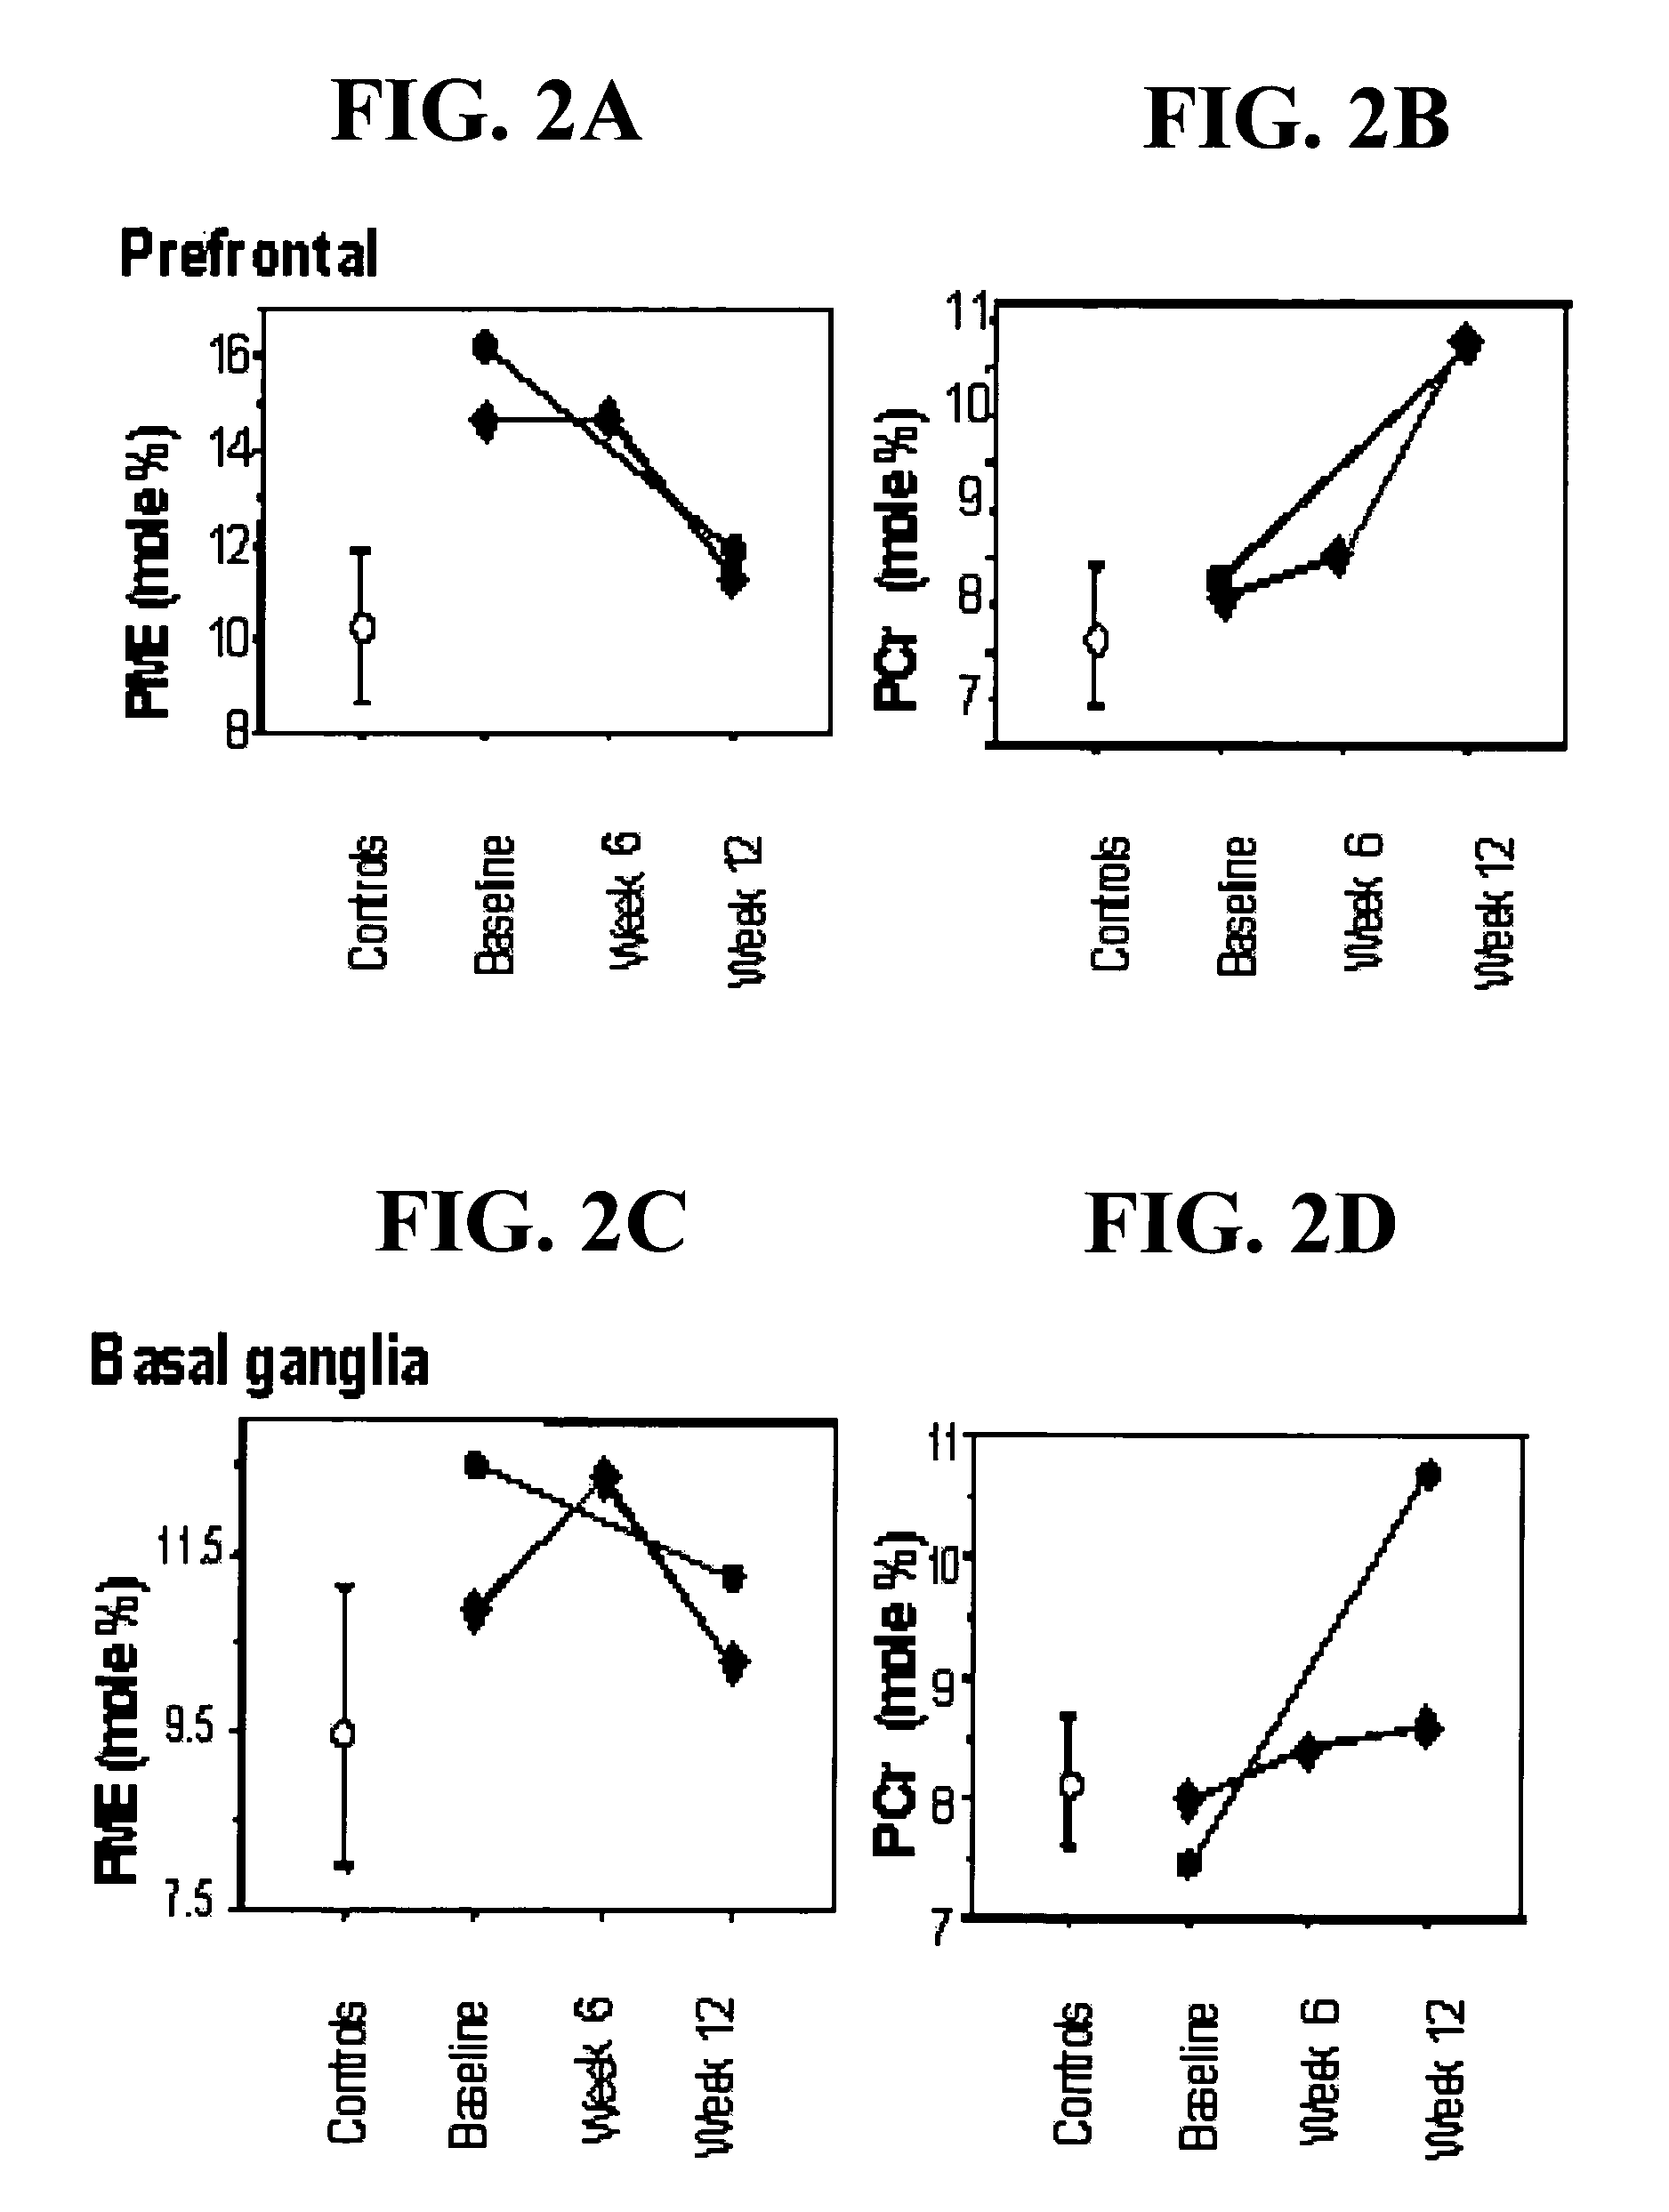 Method and system for diagnosis of neuropsychiatric disorders including chronic alcoholism